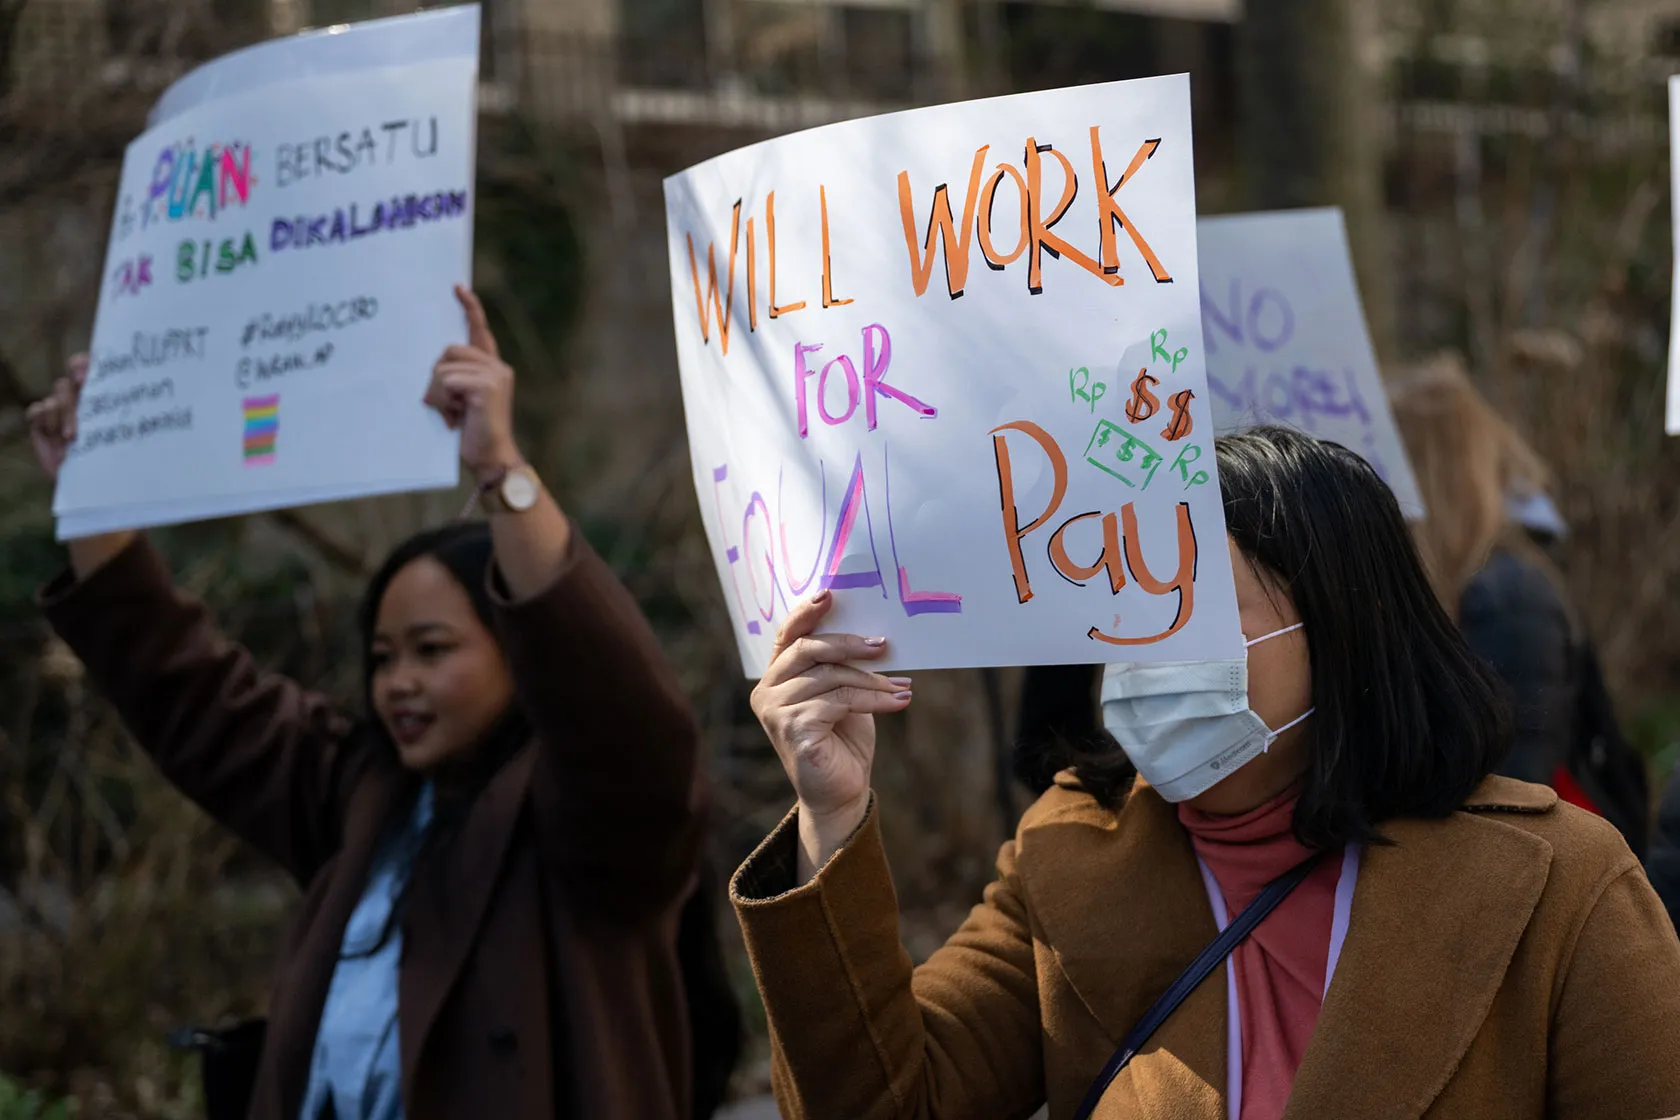 Women protest for equal pay at a rally on International Women’s Day outside the United Nations building.